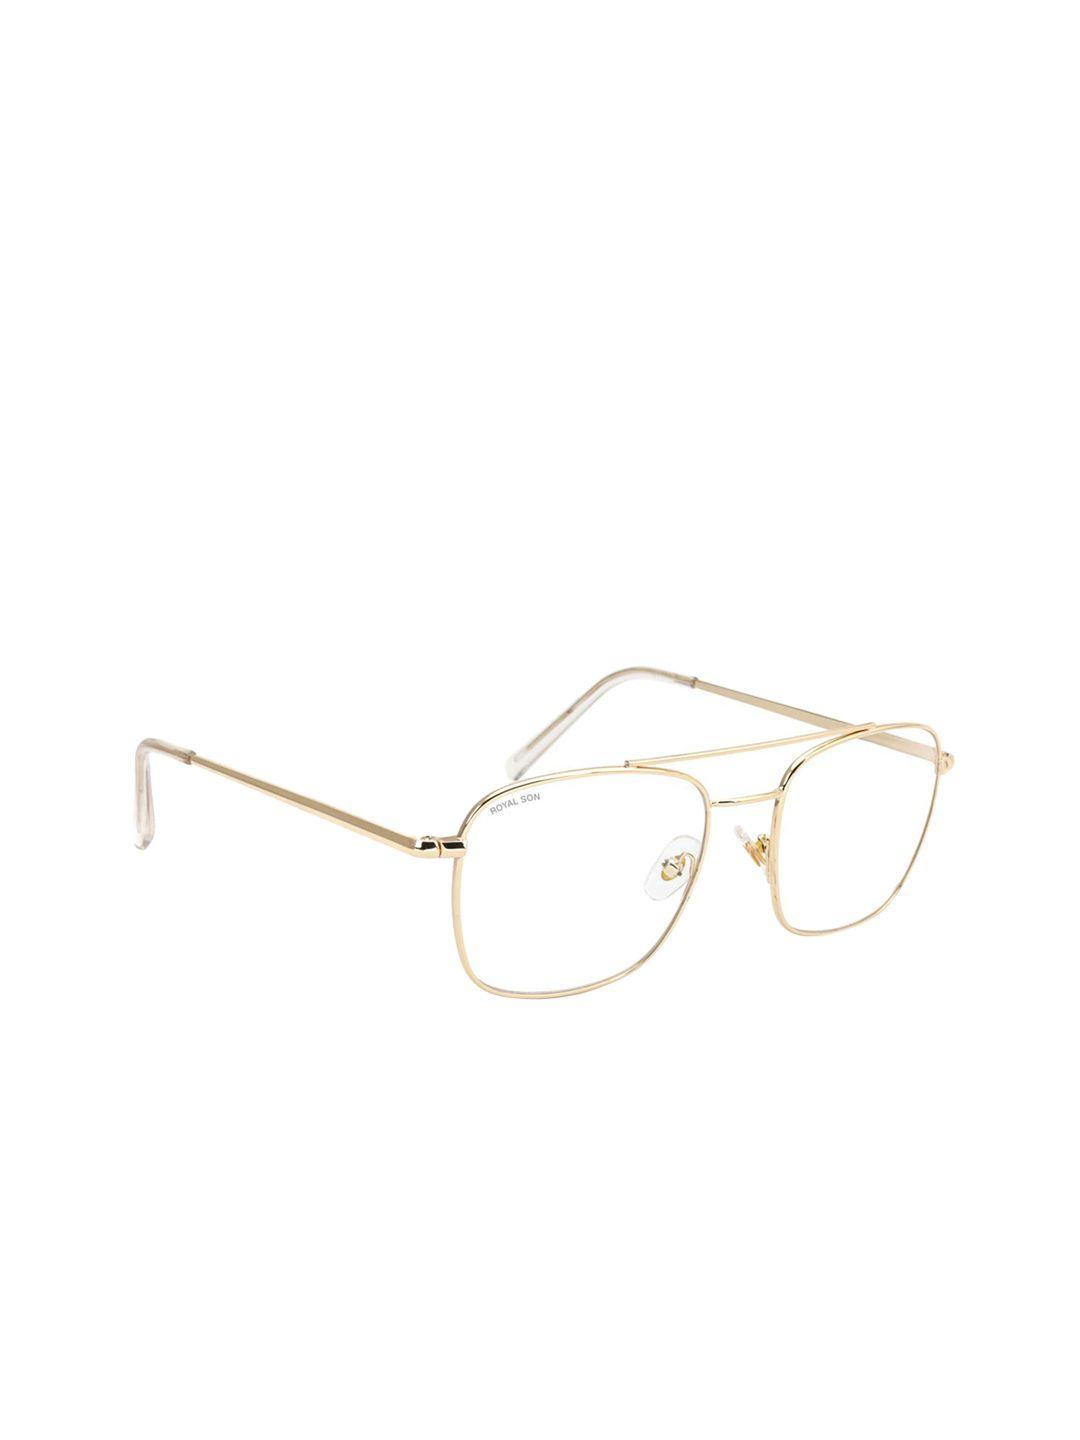 royal son unisex gold-toned solid full rim square frames rs0022sf